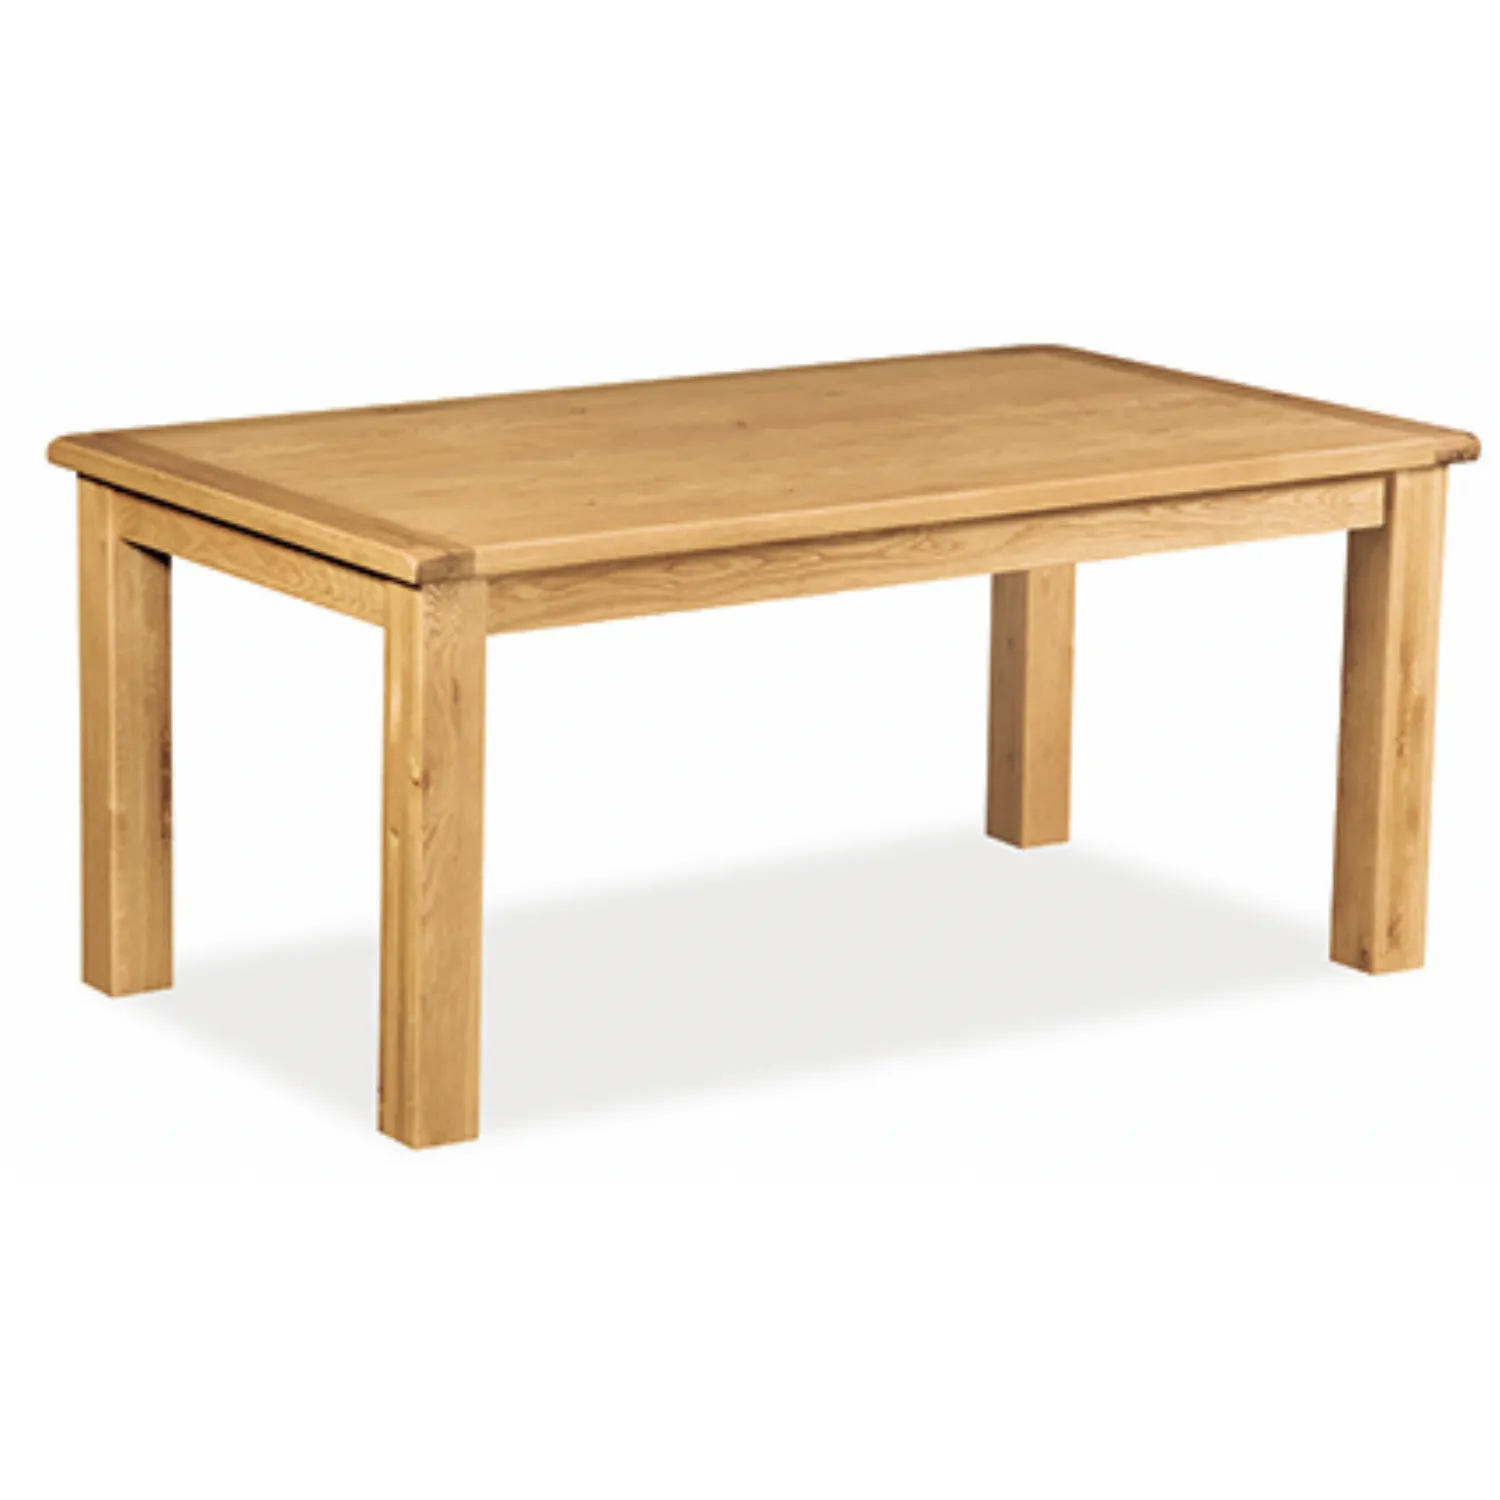 Rustic Solid Oak 150cm Fixed Dining Table